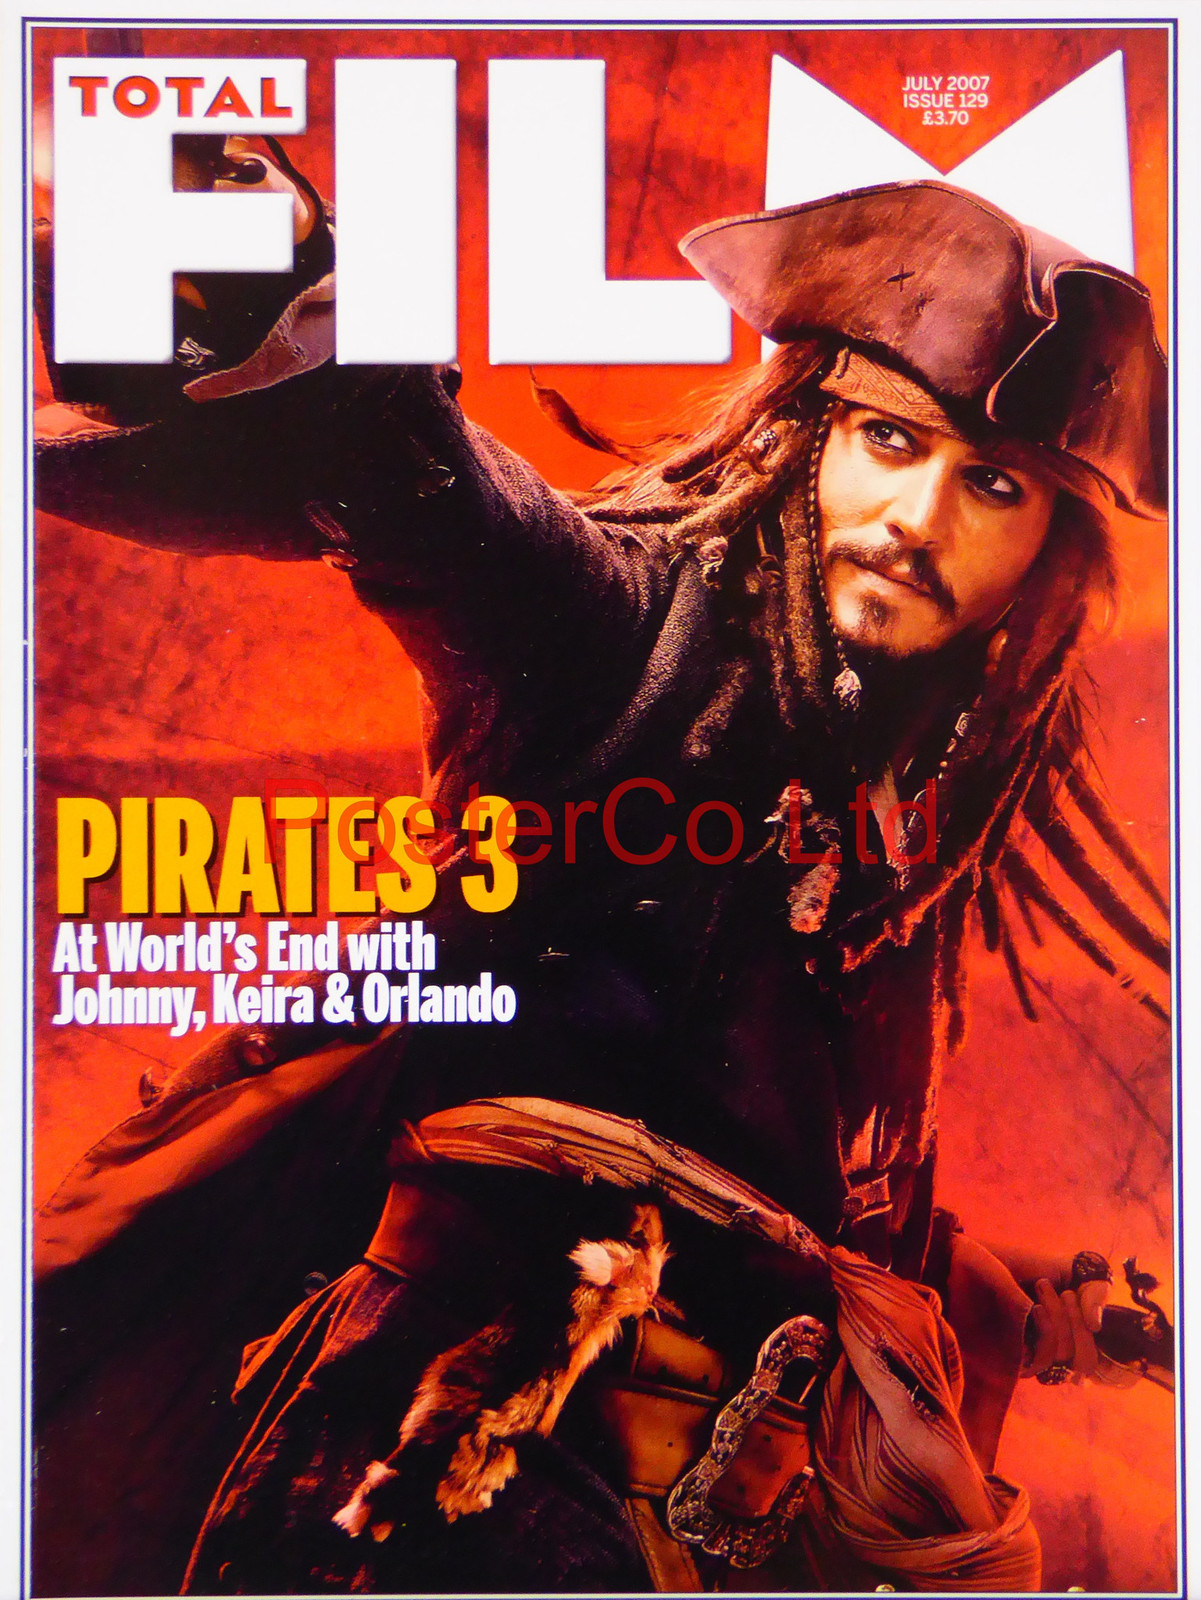 Pirates of the Carribean Jack Sparrow Total Film cover July 2007 (Film ...